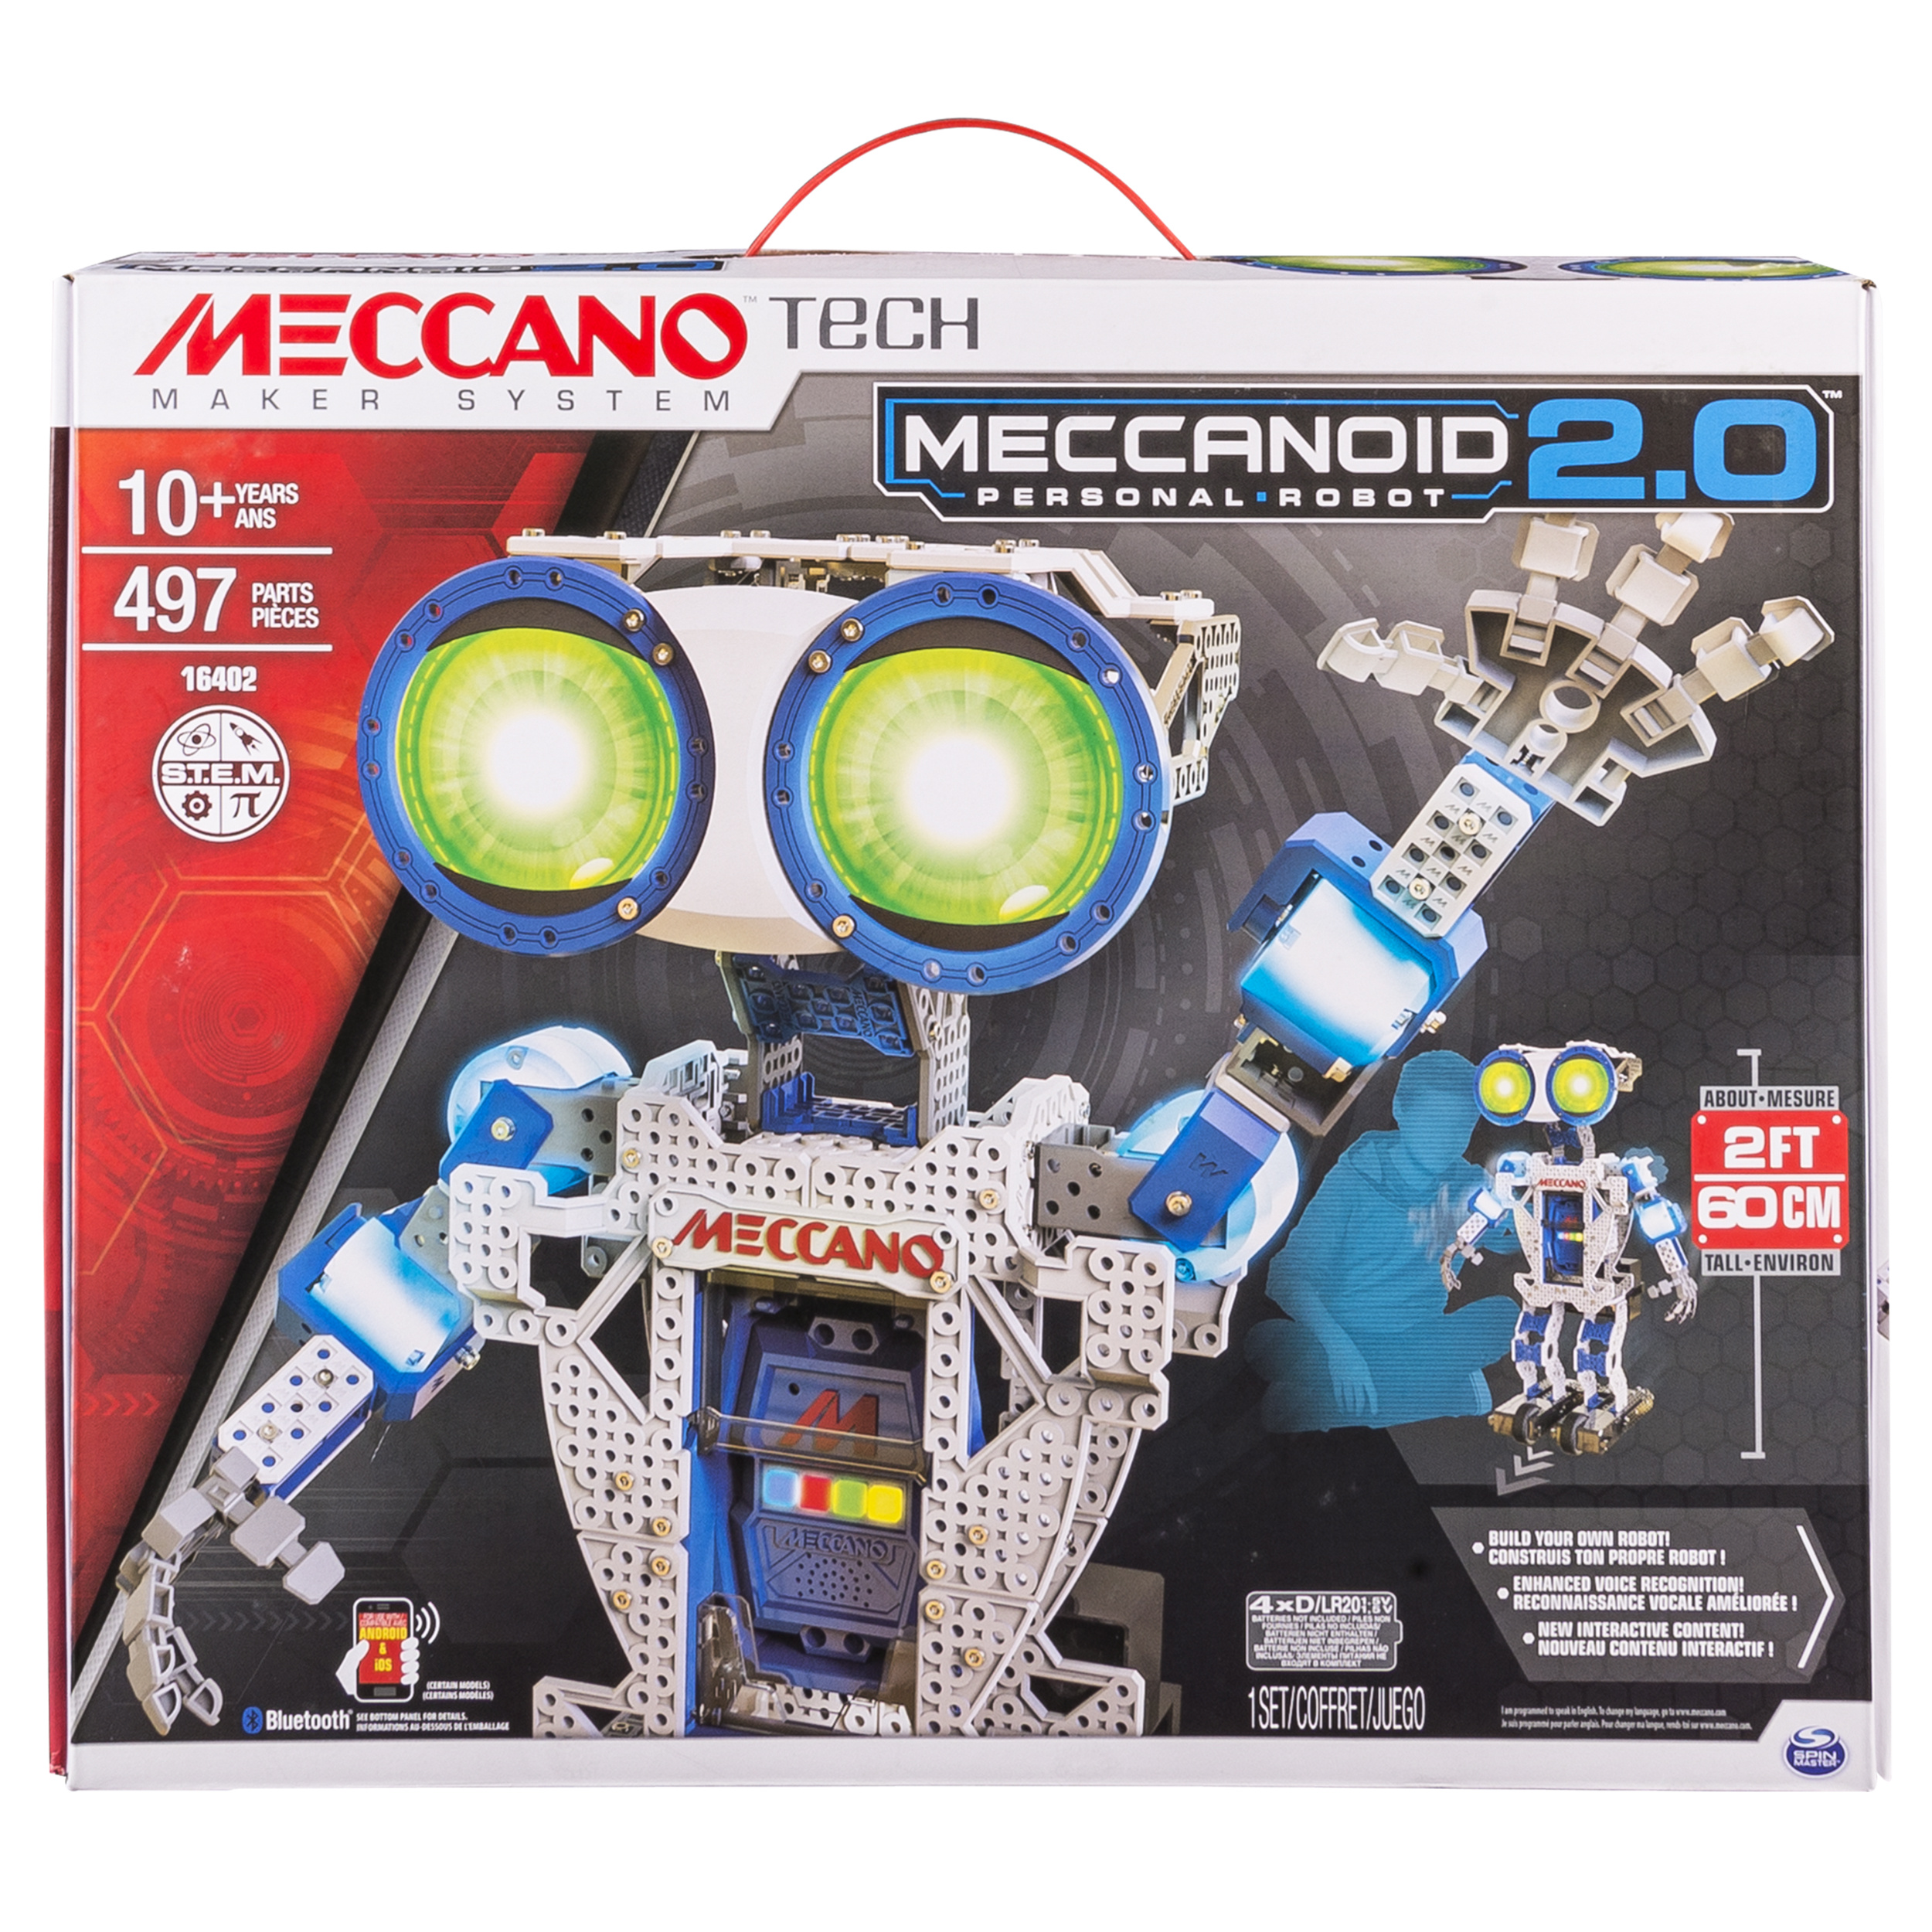 Meccano by Erector, Meccanoid 2.0 Robot-Building Kit STEM Engineering Education Toy - image 1 of 8